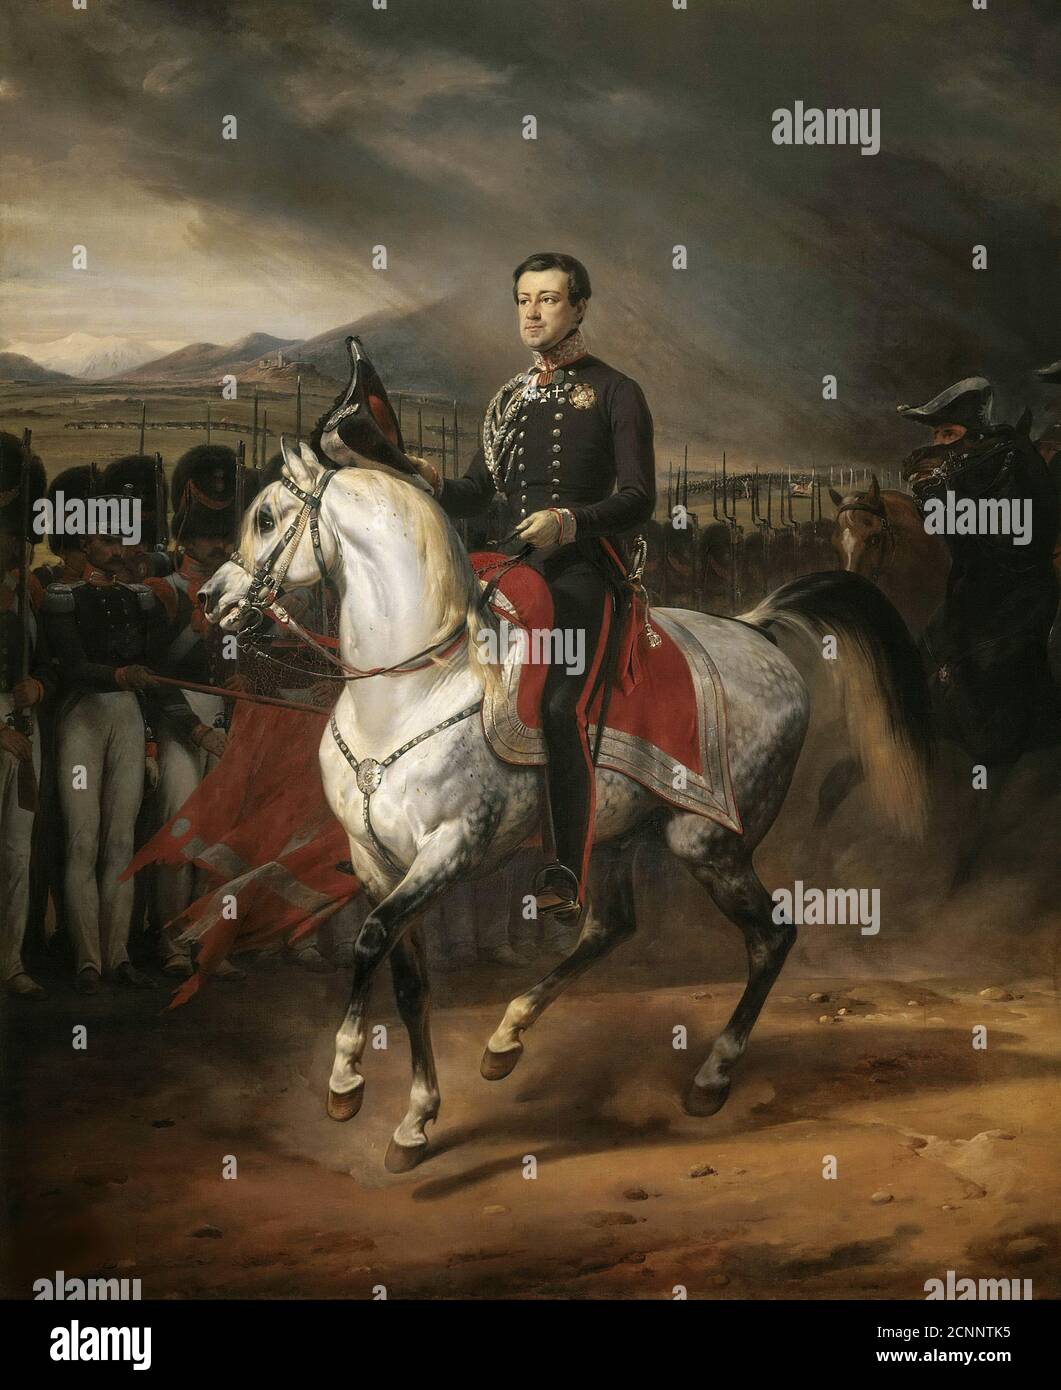 Equestrian portrait of Charles Albert (1798-1849), King of Sardinia, 1834. Found in the collection of Galleria Sabauda, Torino. Stock Photo